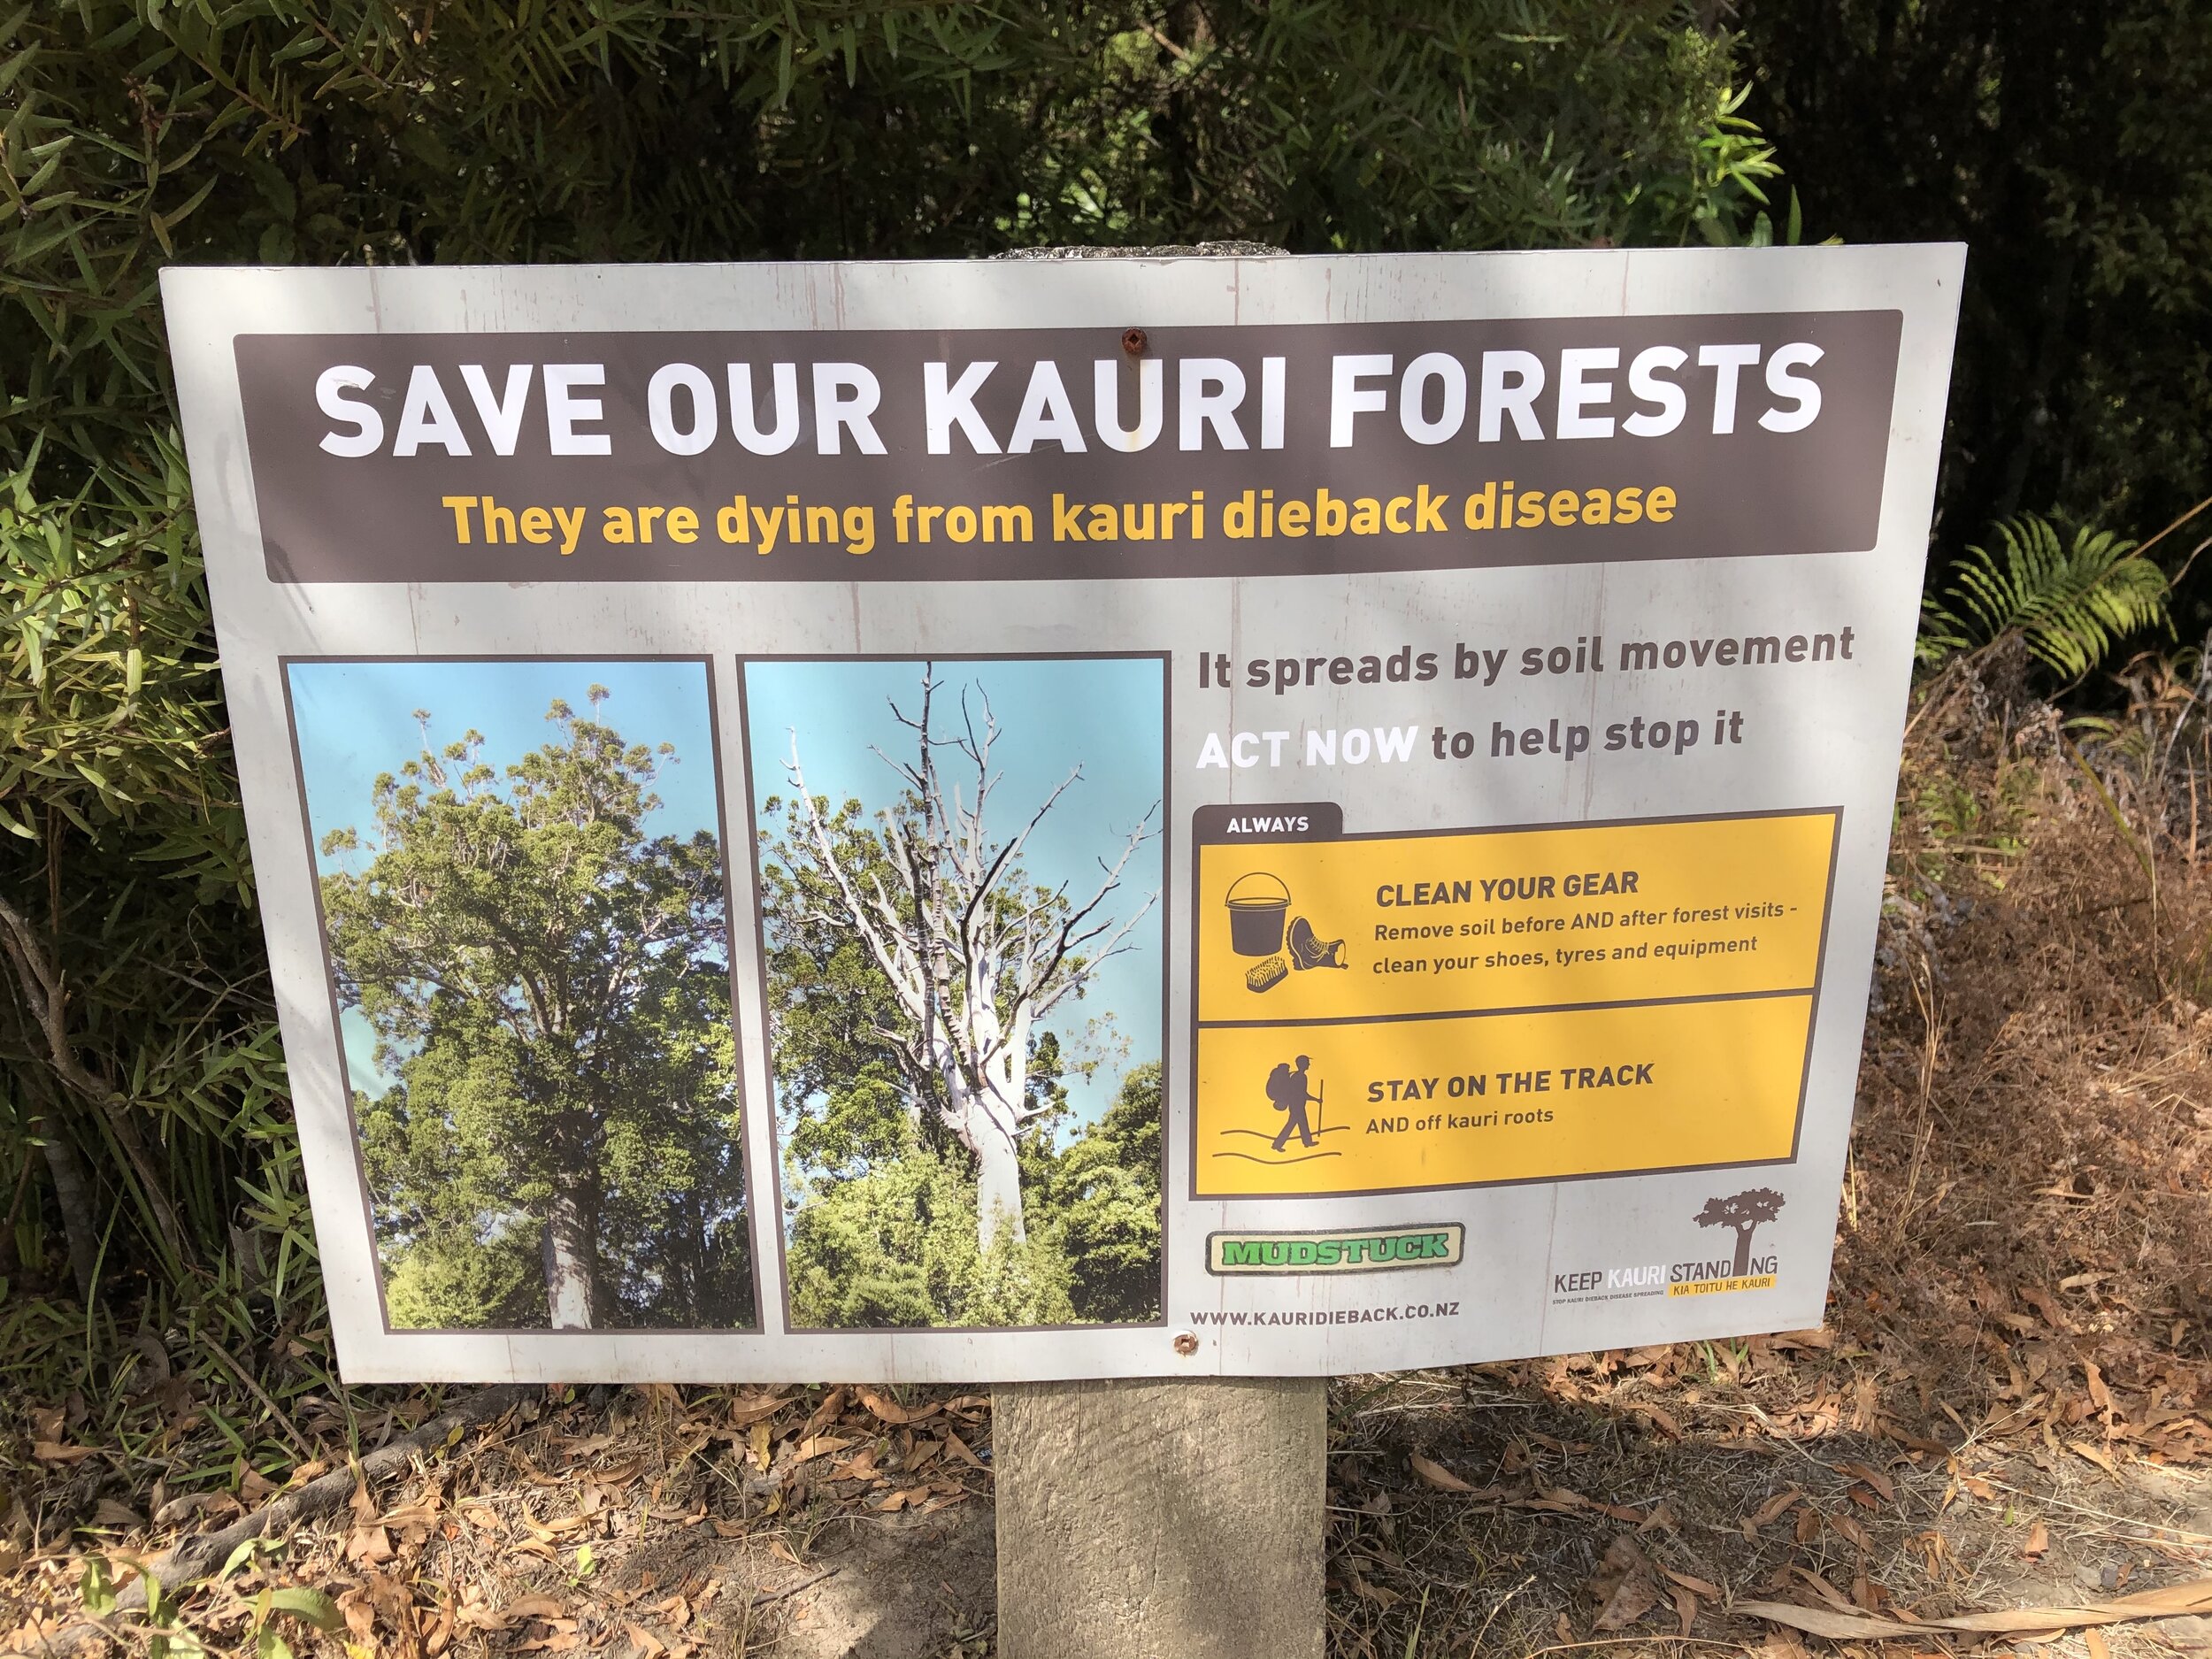  An intensifying threat to living kauri trees in New Zealand is the emergence of “Kauri Dieback Disease,” which results in yellowing of leaves, premature loss of branches, thinning of tree crowns, lesions that bleed resin, and eventually tree death. 